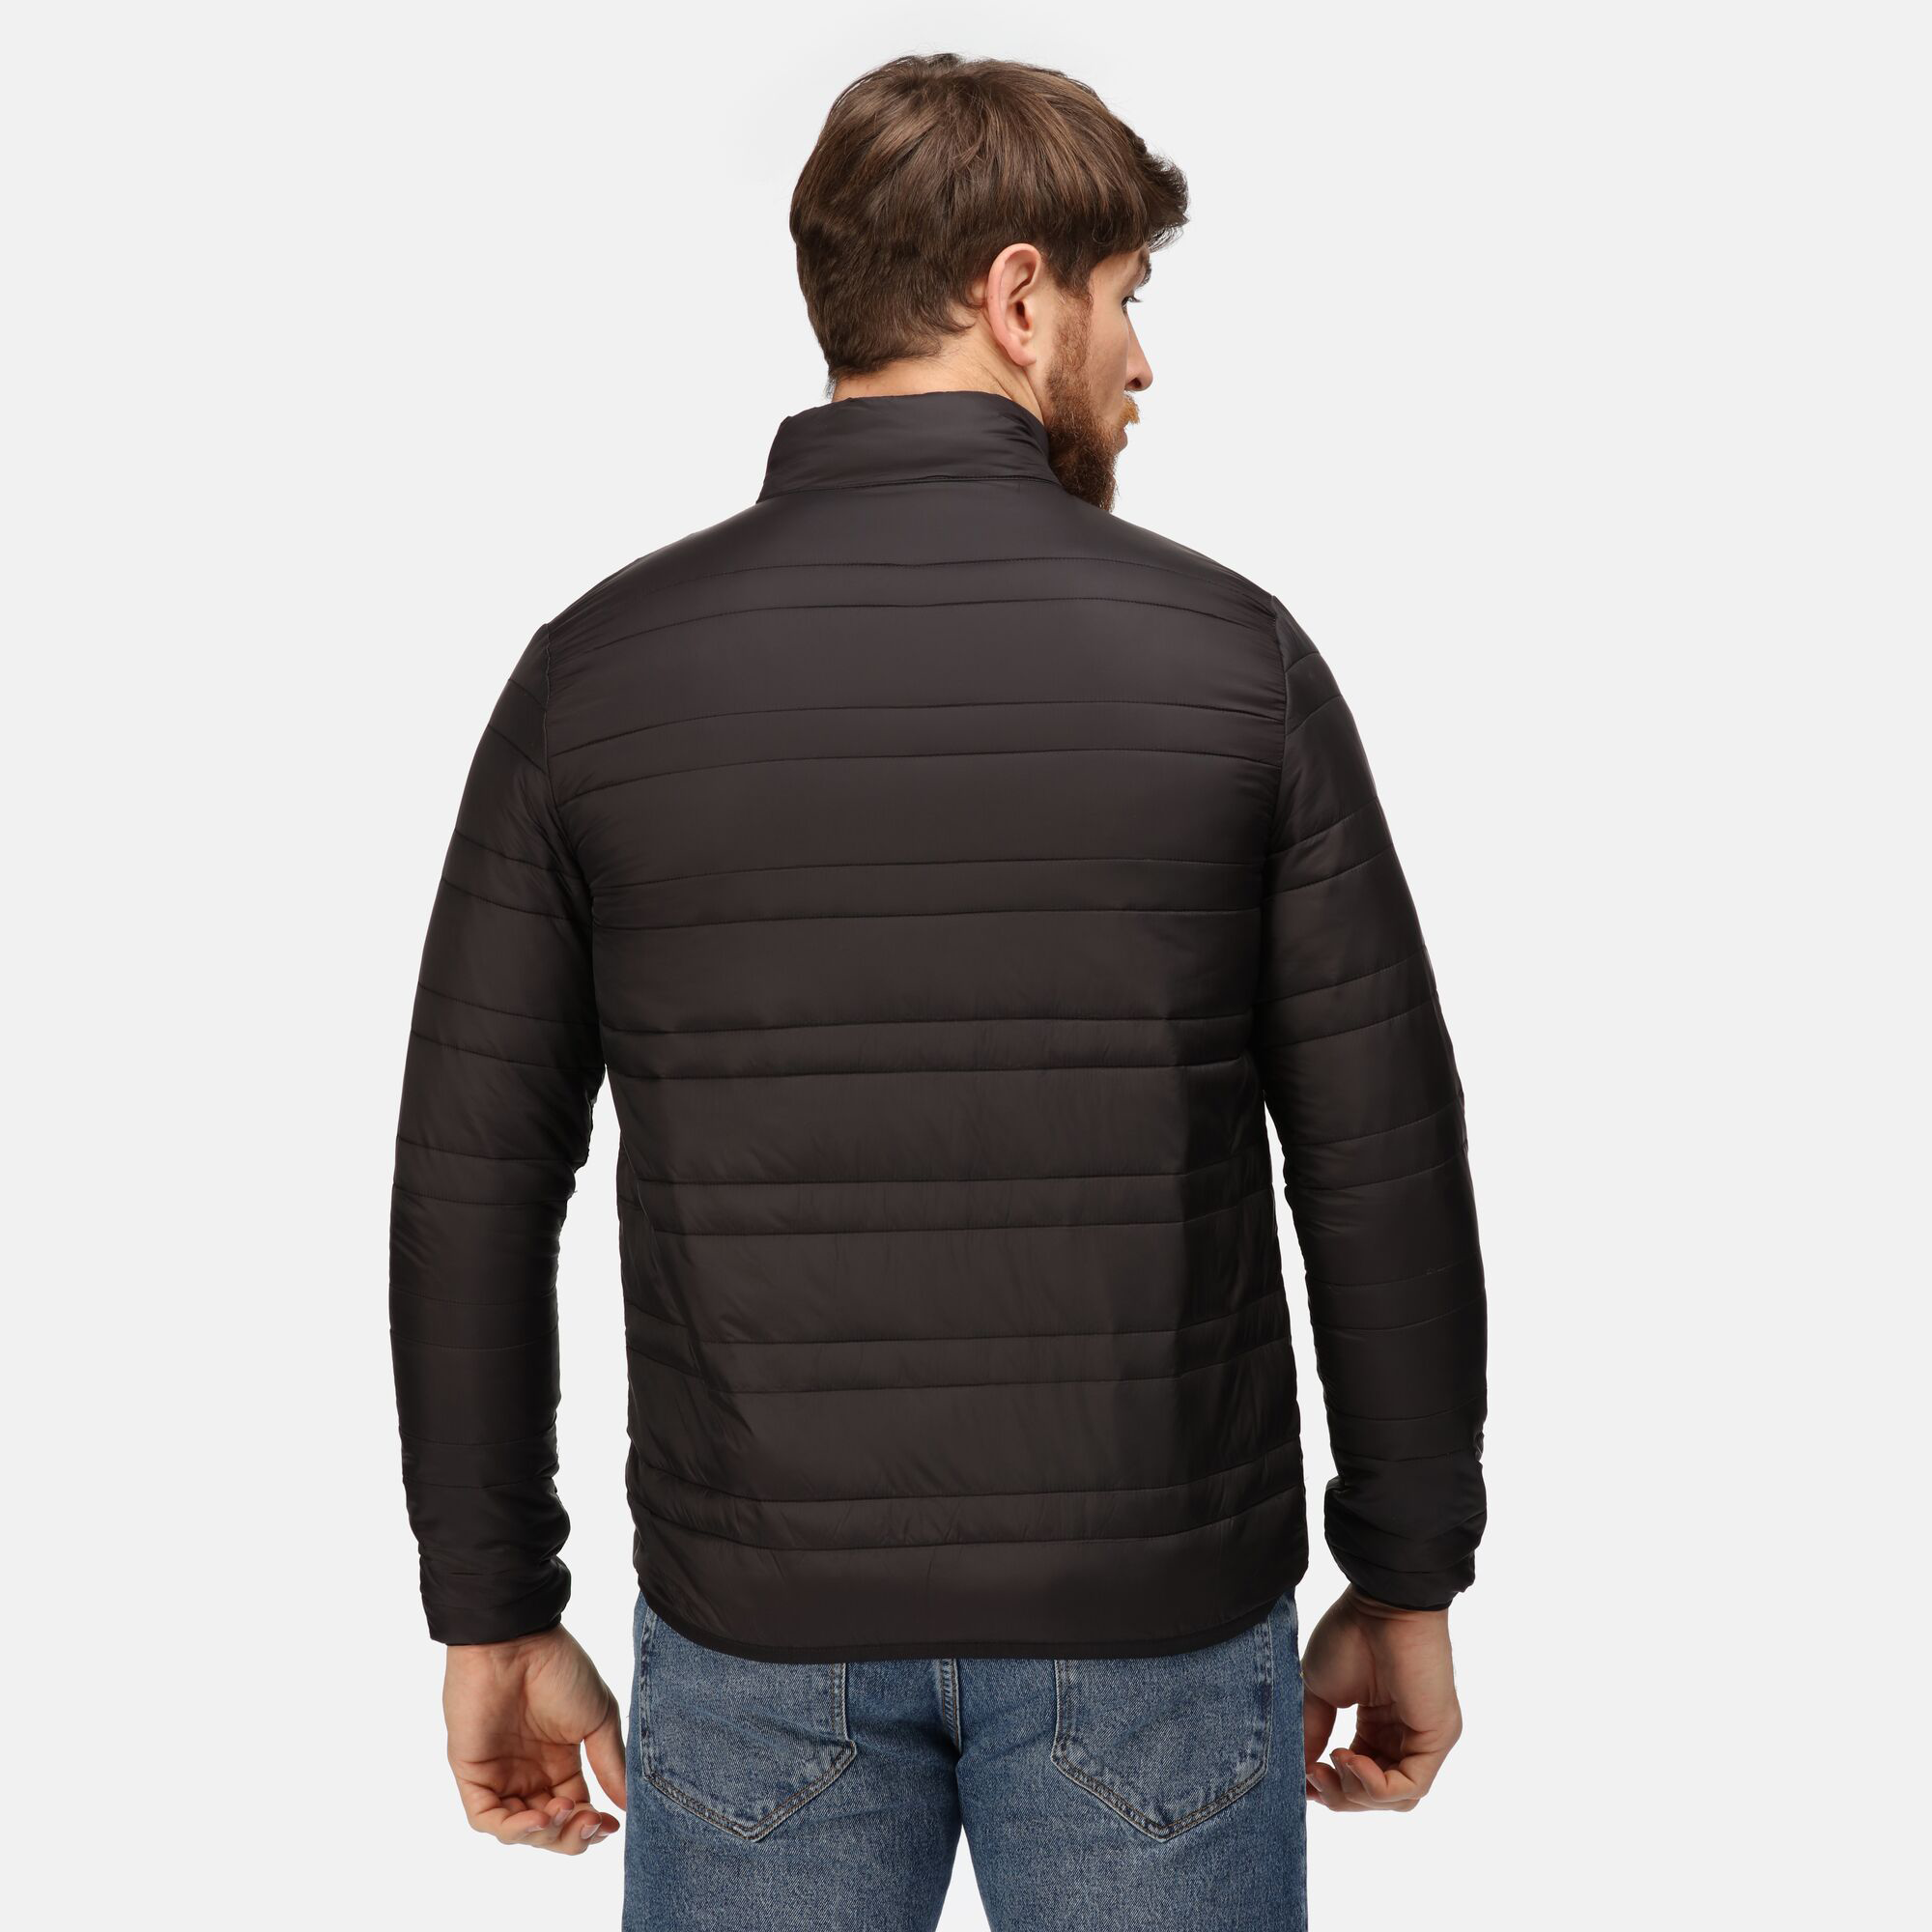 FIREDOWN DOWN-TOUCH INSULATED JACKET - Regatta Professional